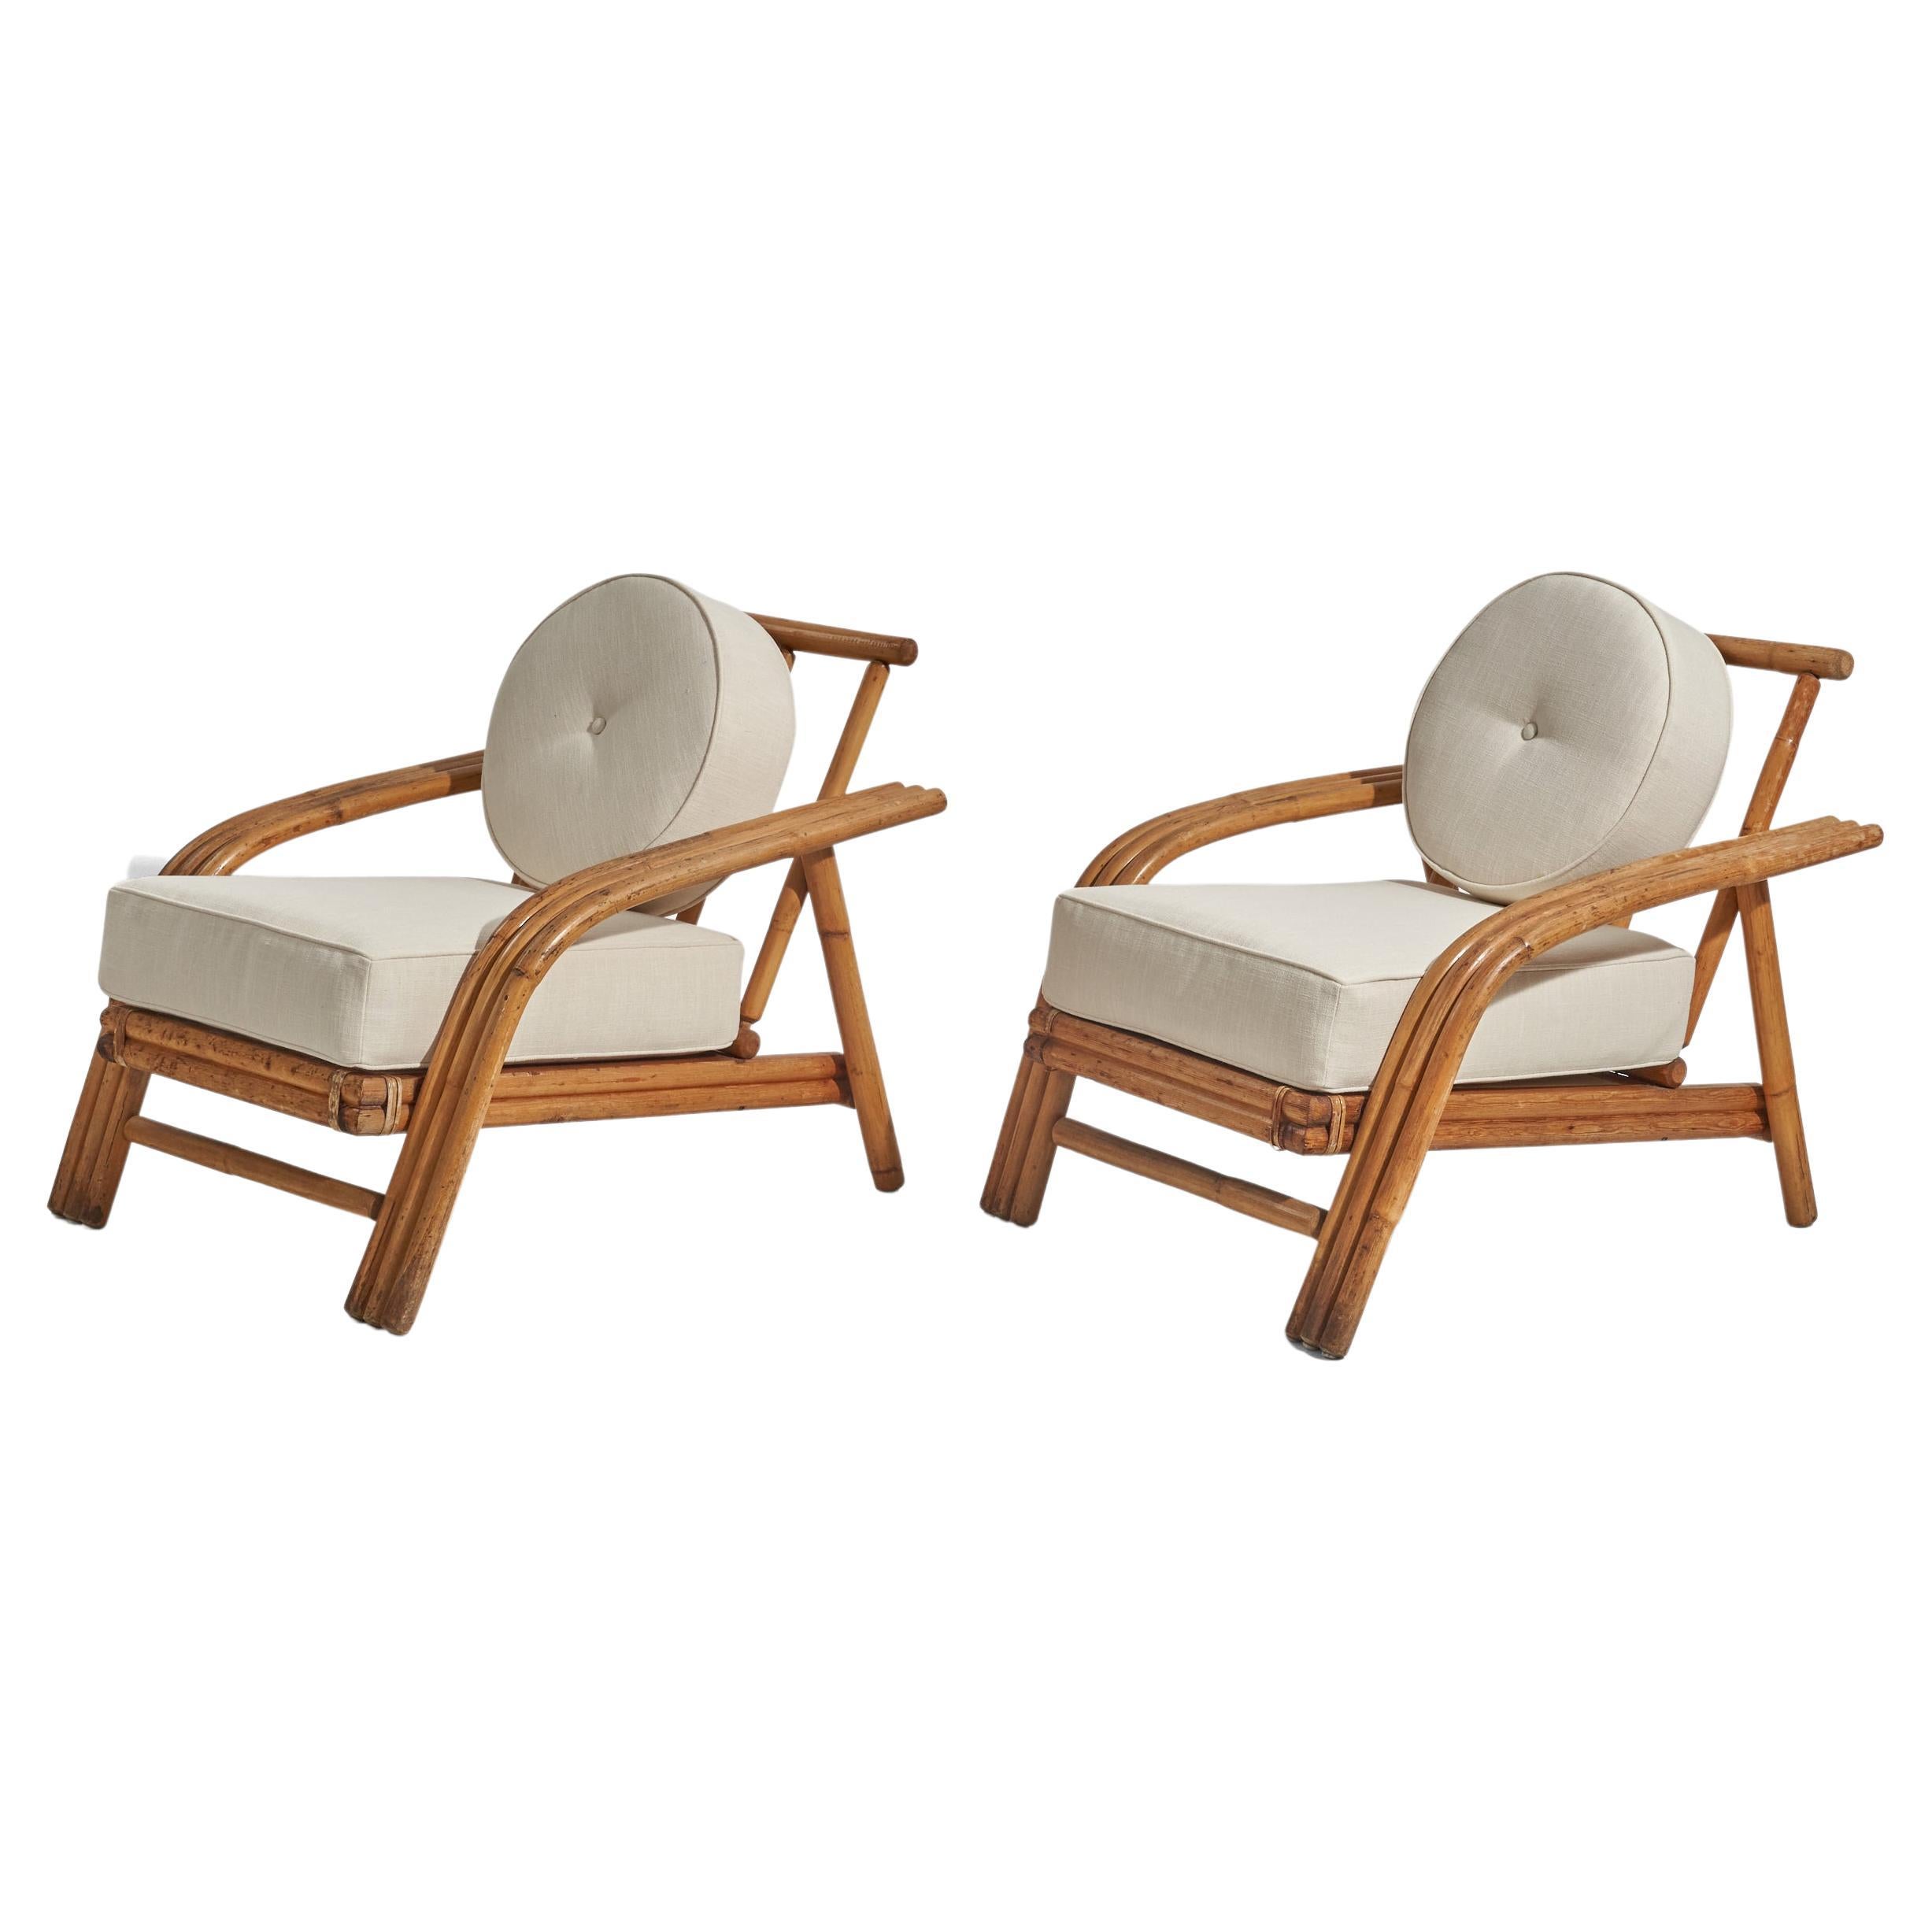 American Designer, Lounge Chairs, Fabric, Bamboo, United States, 1950s